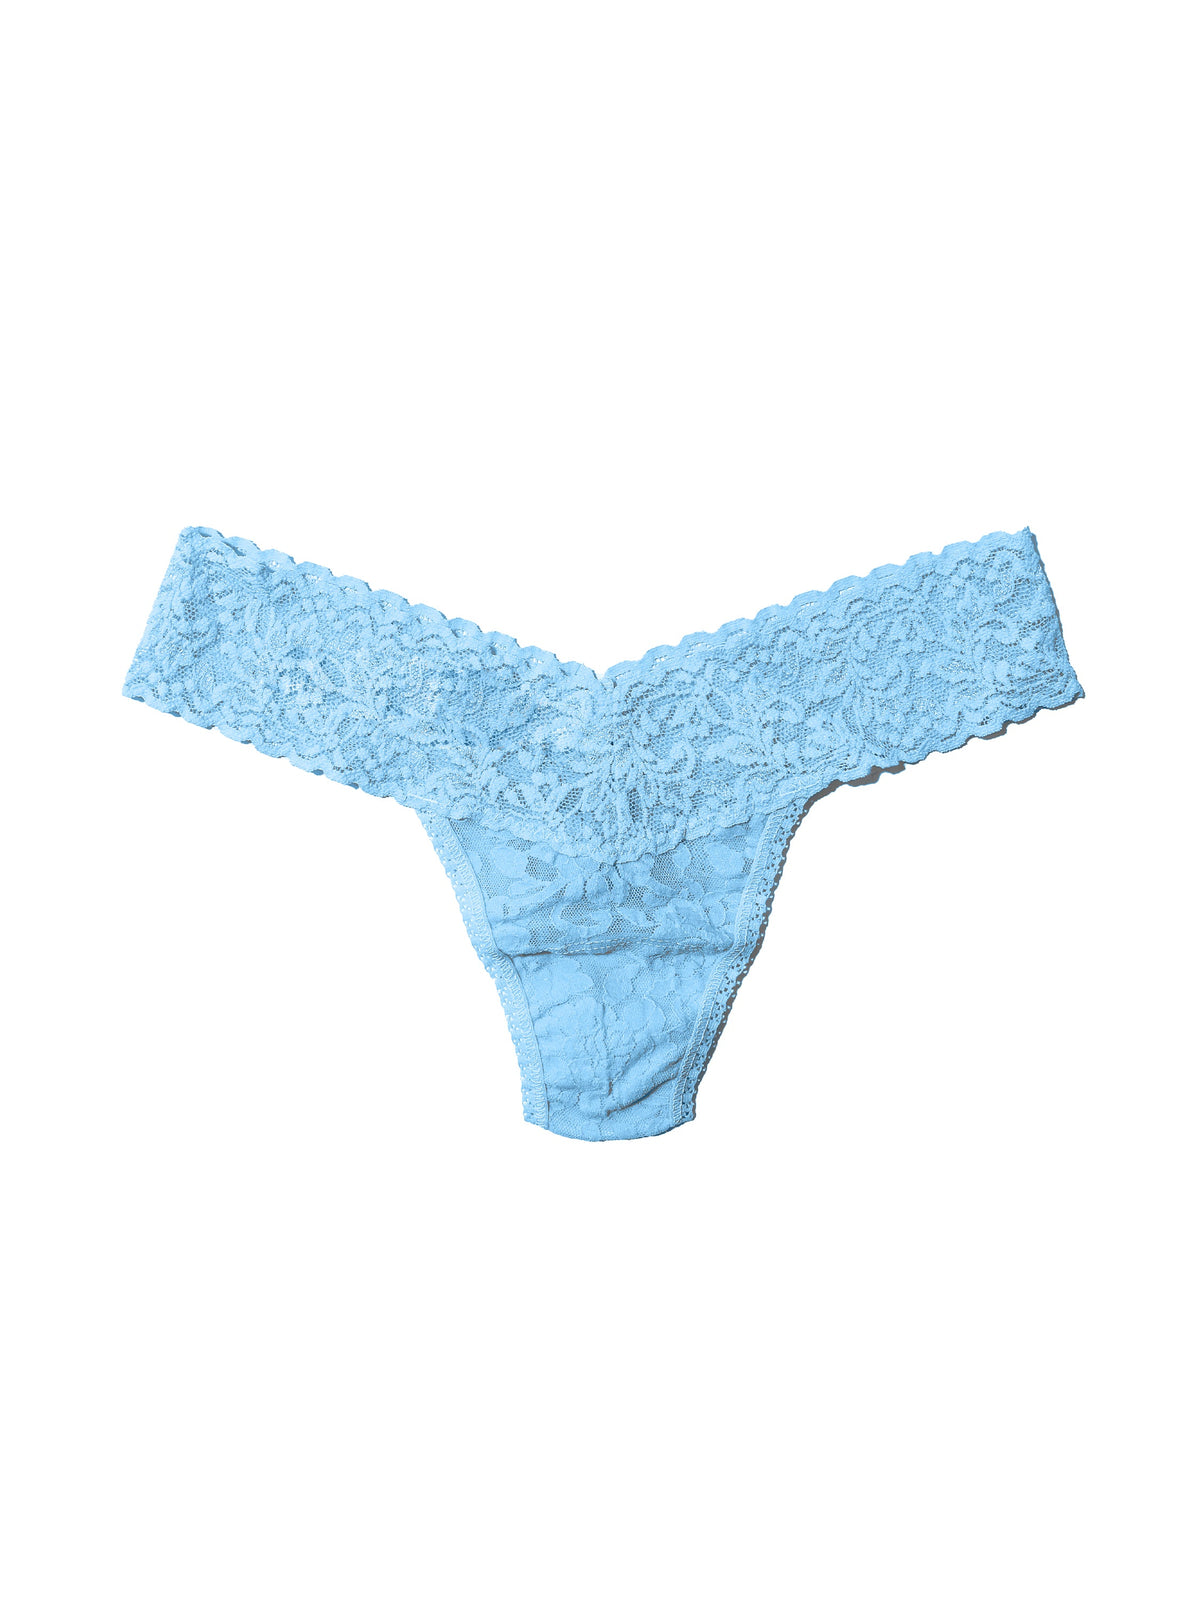 Petite Size Signature Lace Low Rise Thong Partly Cloudy Blue | Hanky Panky